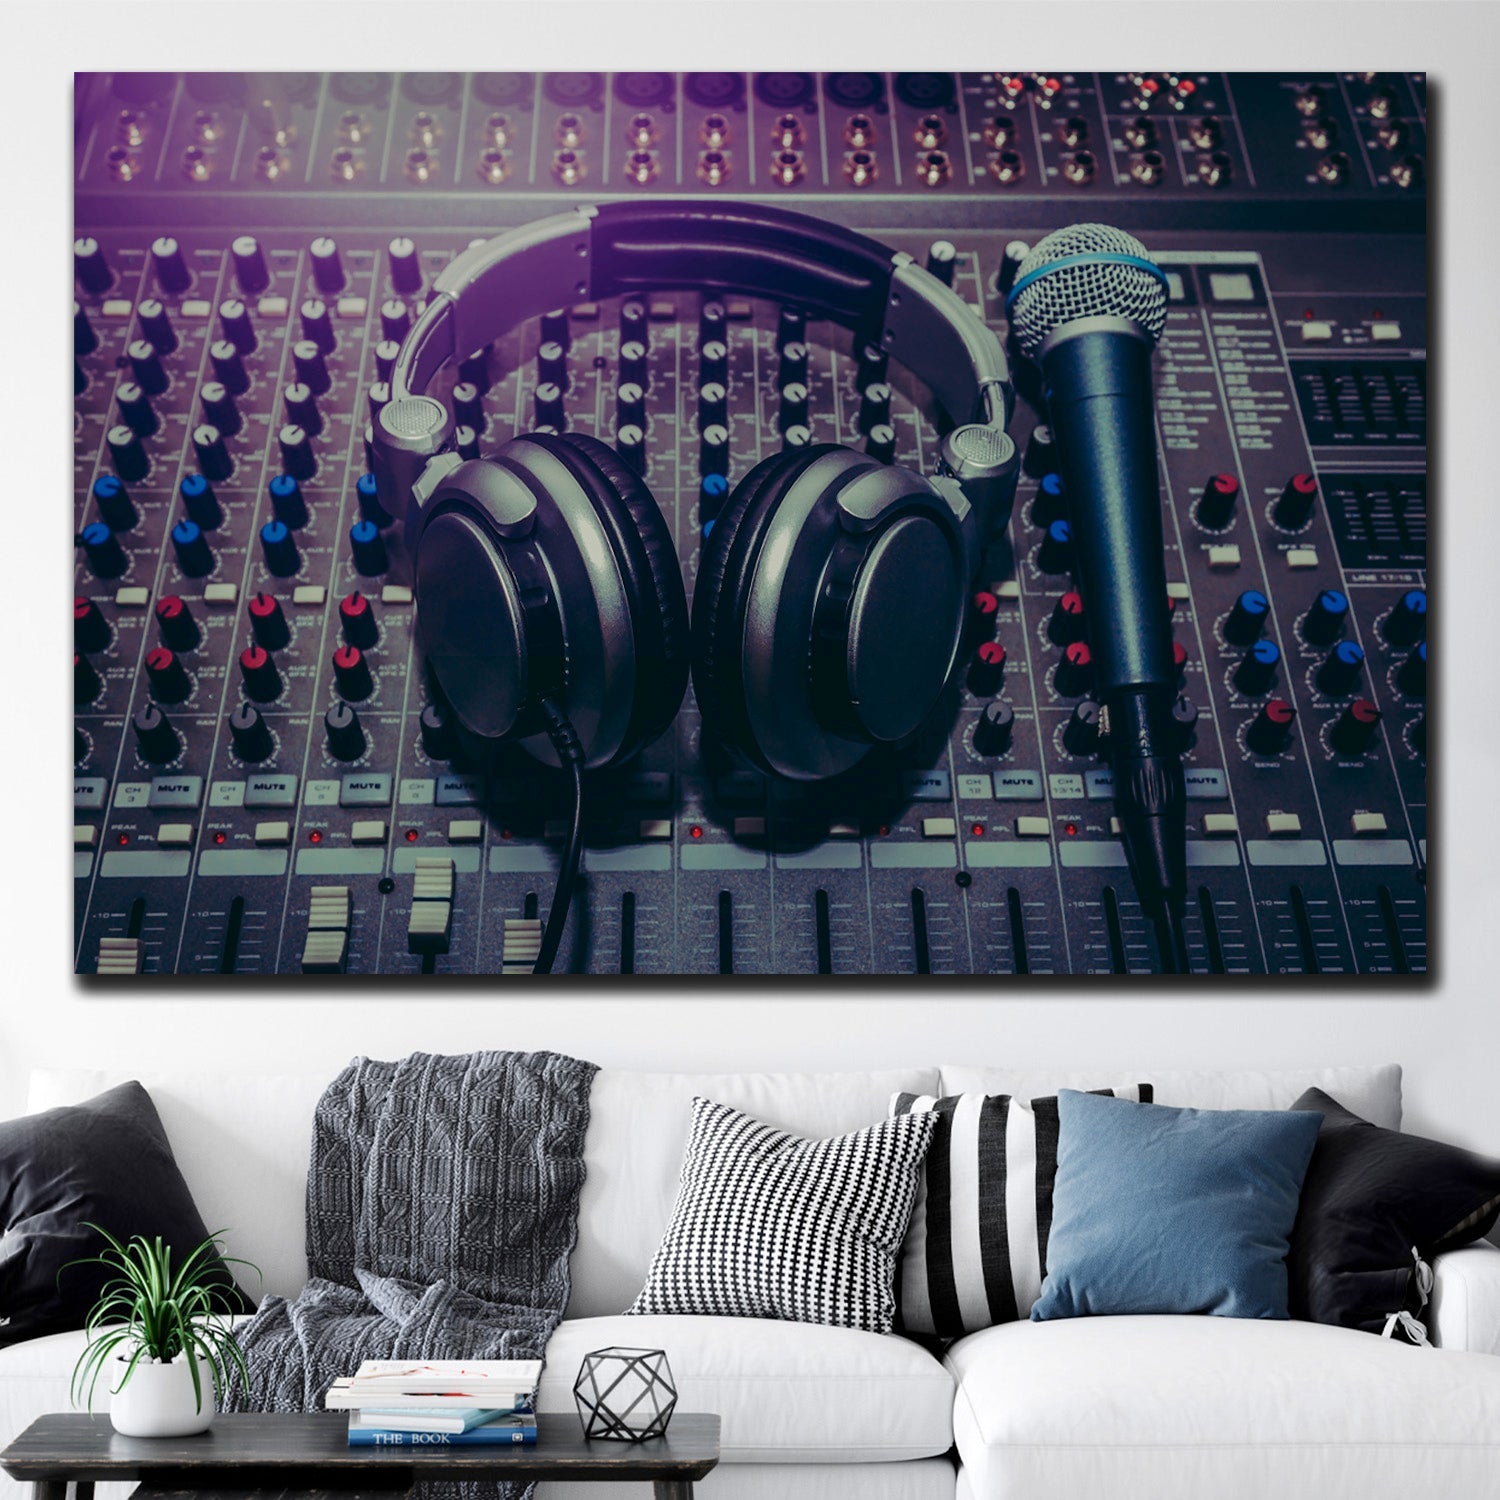 https://cdn.shopify.com/s/files/1/0387/9986/8044/products/FeeltheMusicCanvasArtprintStretched-4.jpg